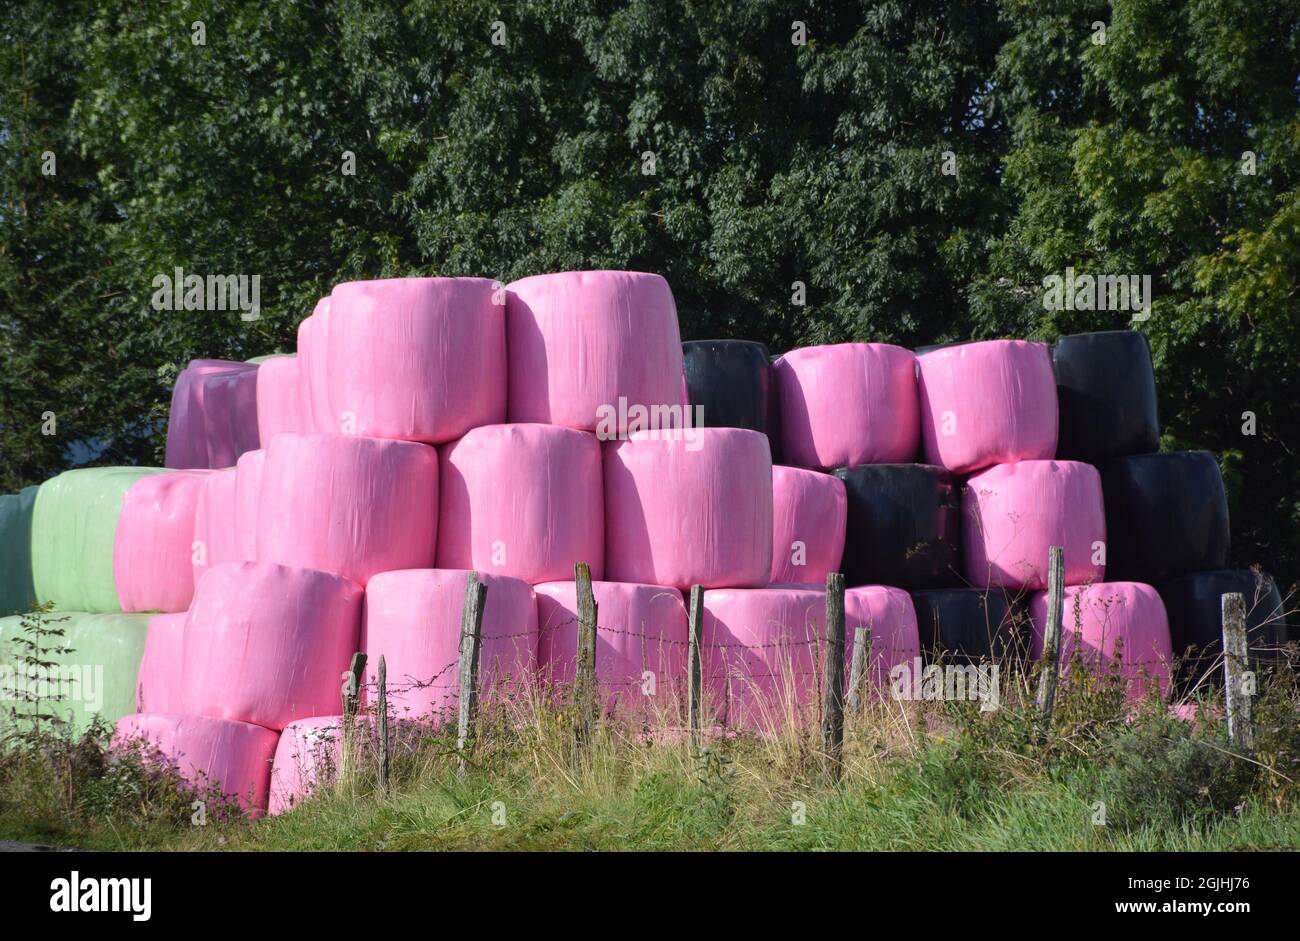 silage under pink and green plastic near a farm, Brion, Cezallier, Puy-de-Dome department, Auvergne-Rhone-Alpes region, Massif-Central, France Stock Photo